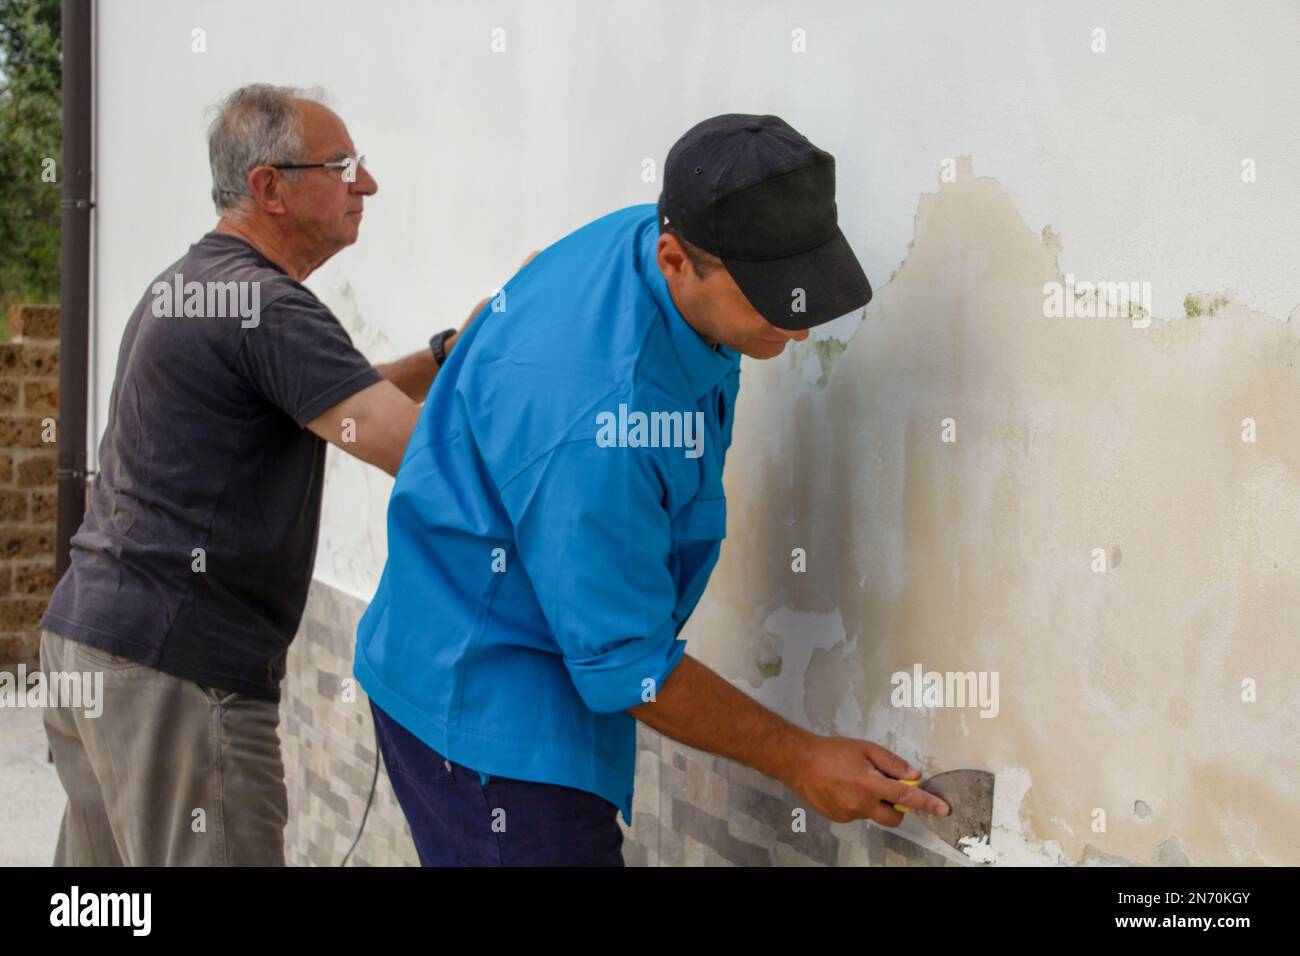 Image of two male construction workers sanding and cleaning a wall of mold. Rising damp problem. Stock Photo